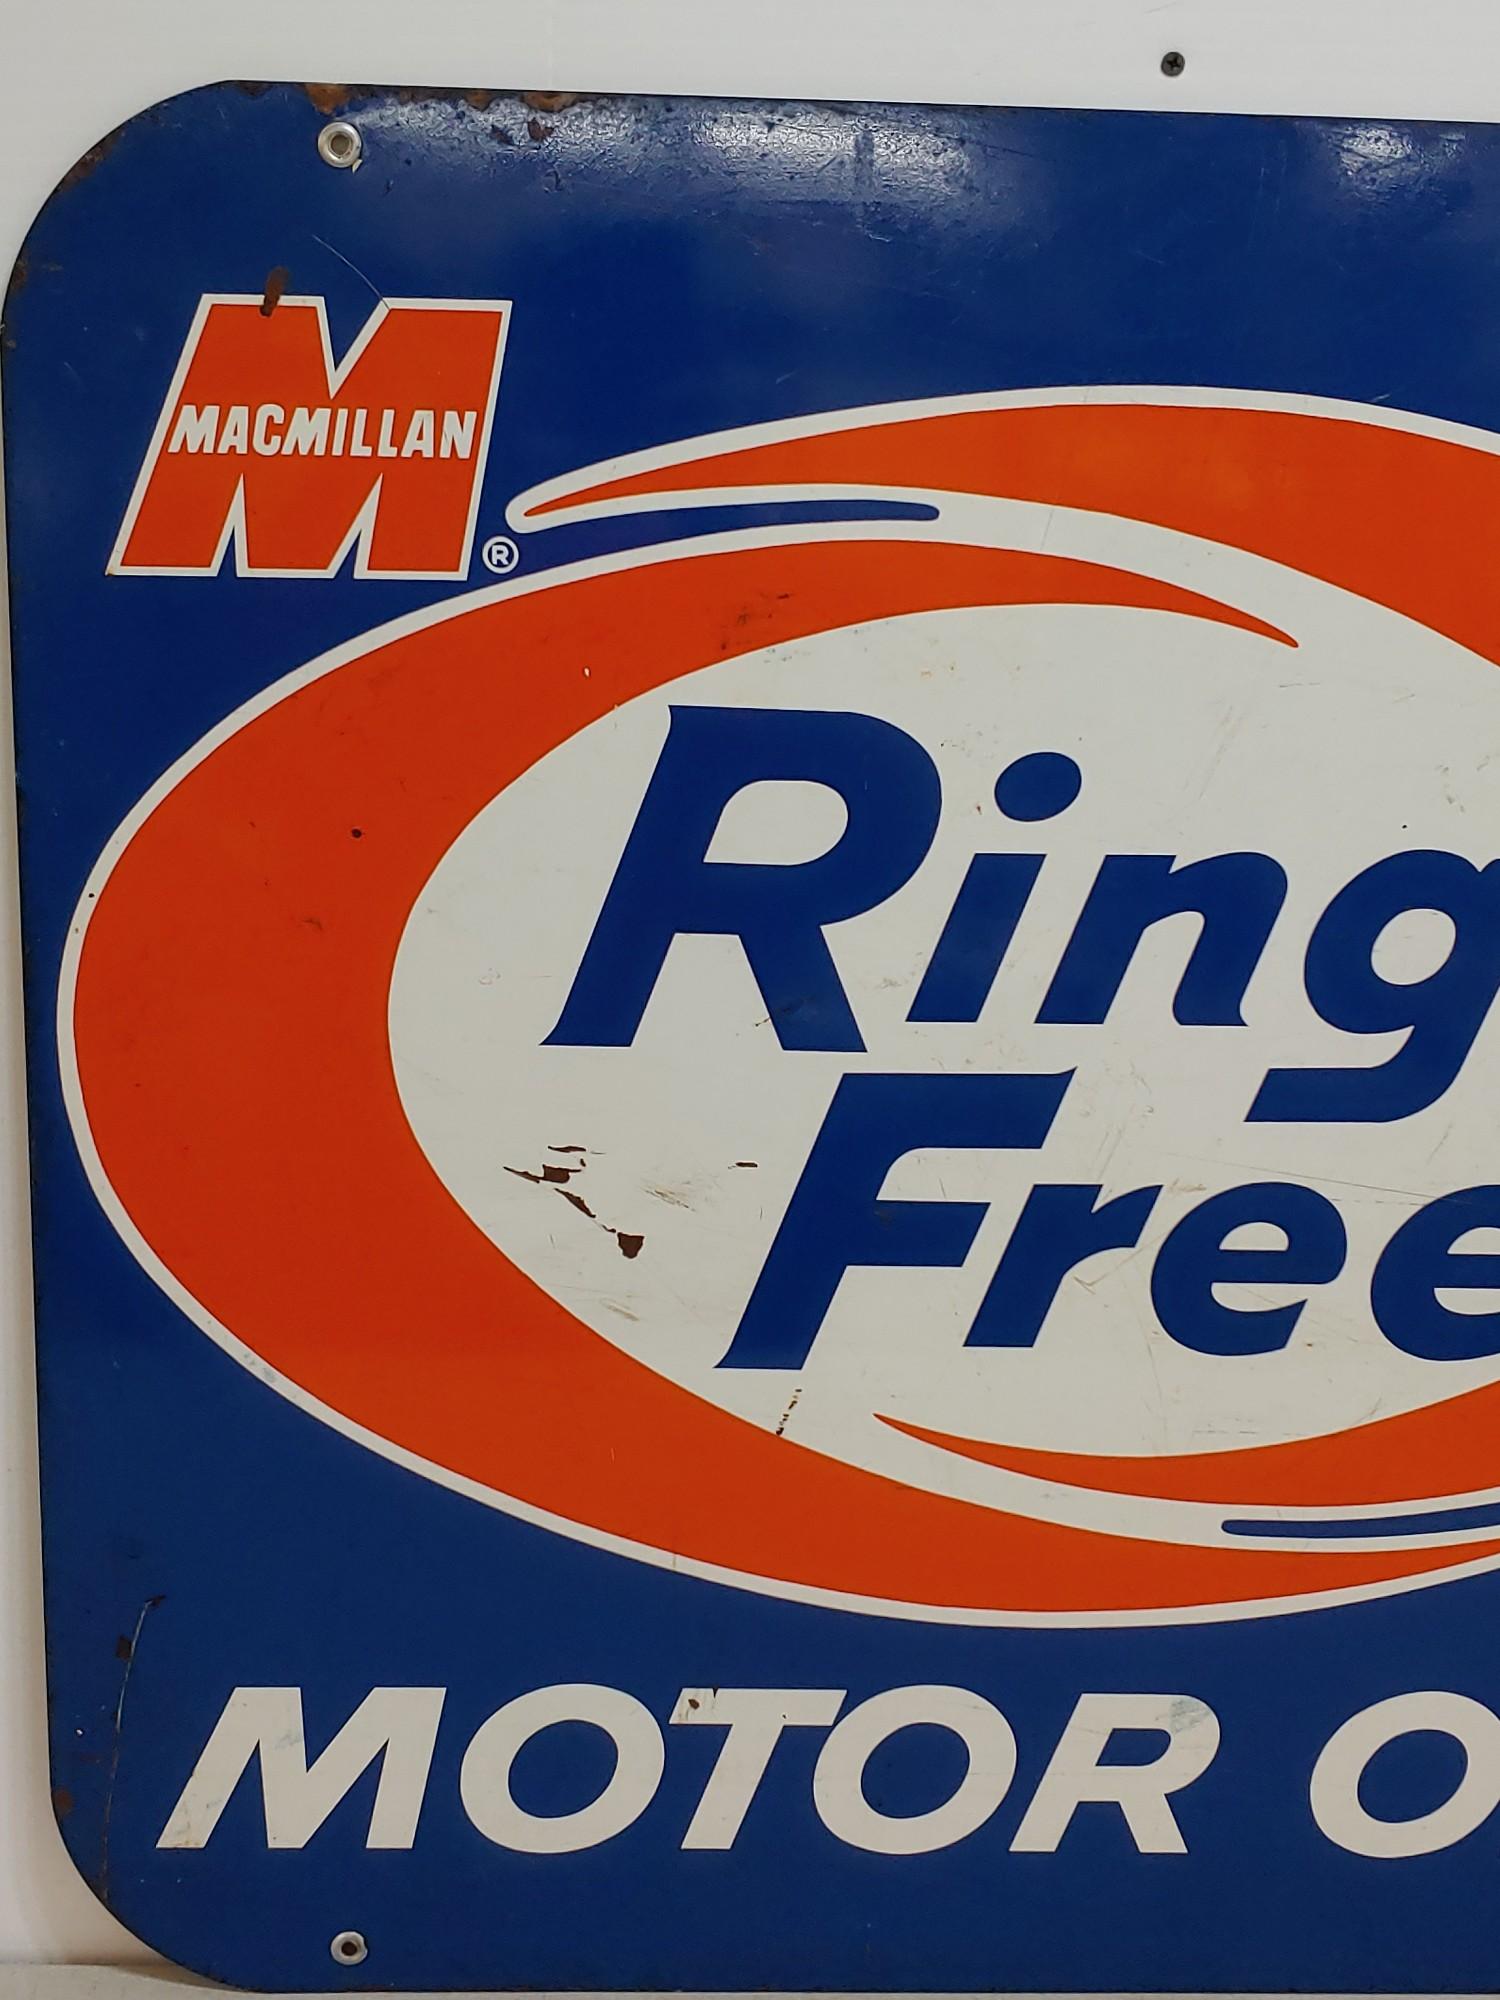 DST Macmillan Ring Free Oil sign